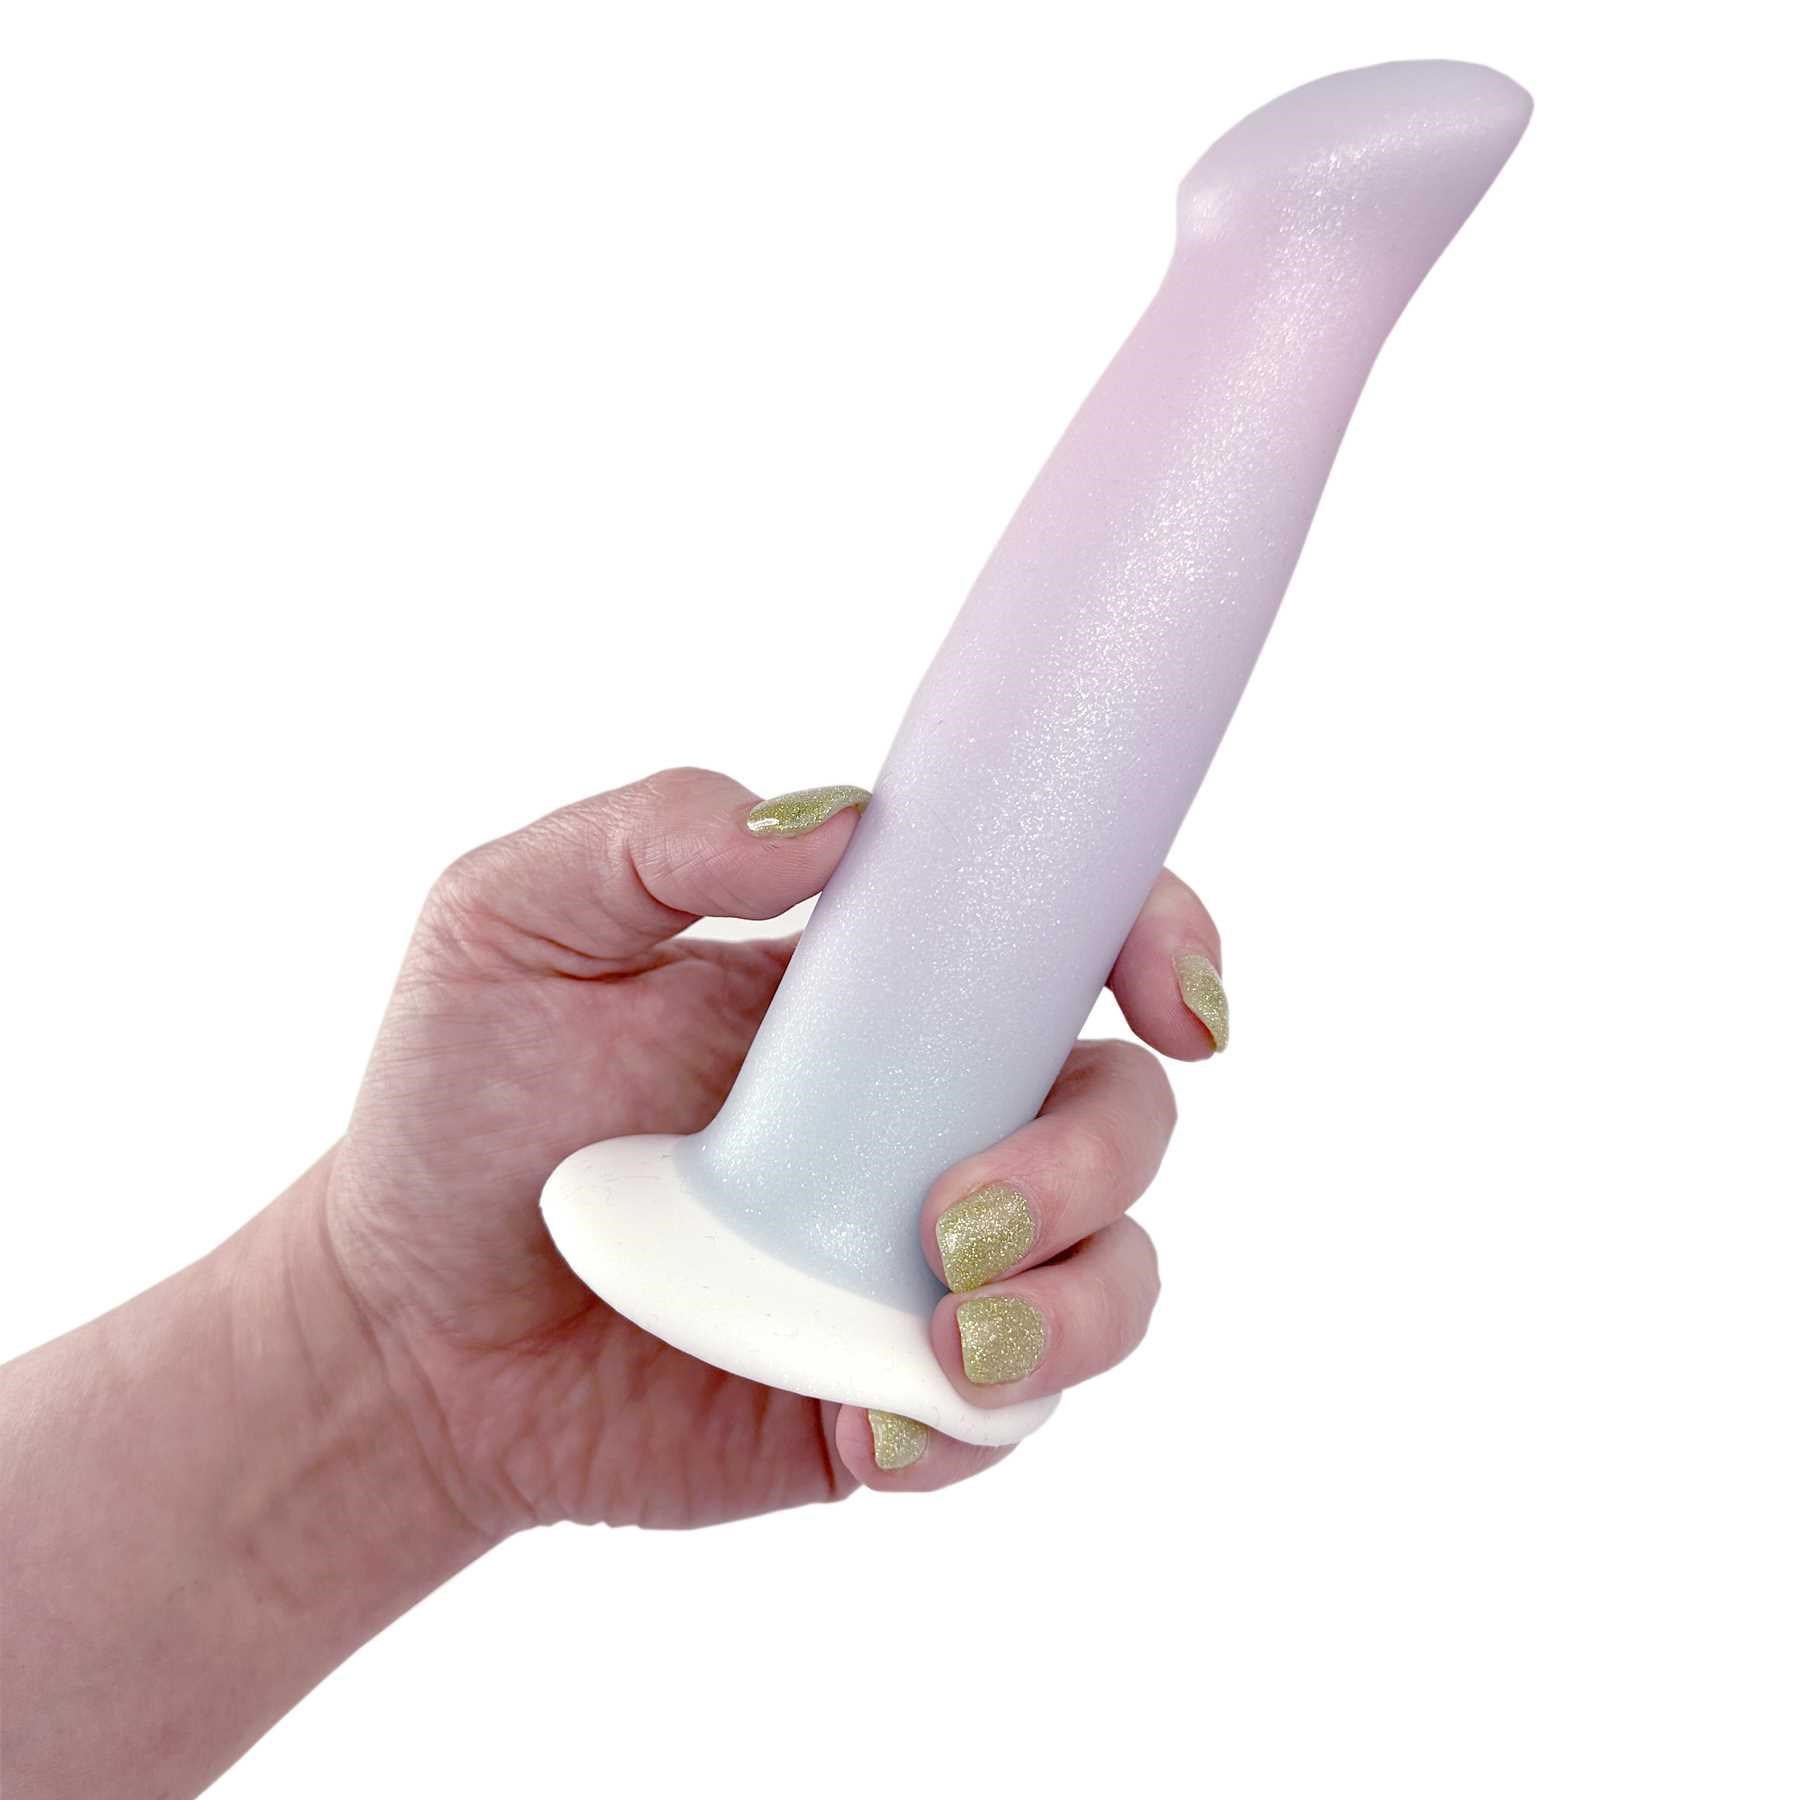 Cotton Candy Pixie Dix 6.5 Silicone Dildo hand held